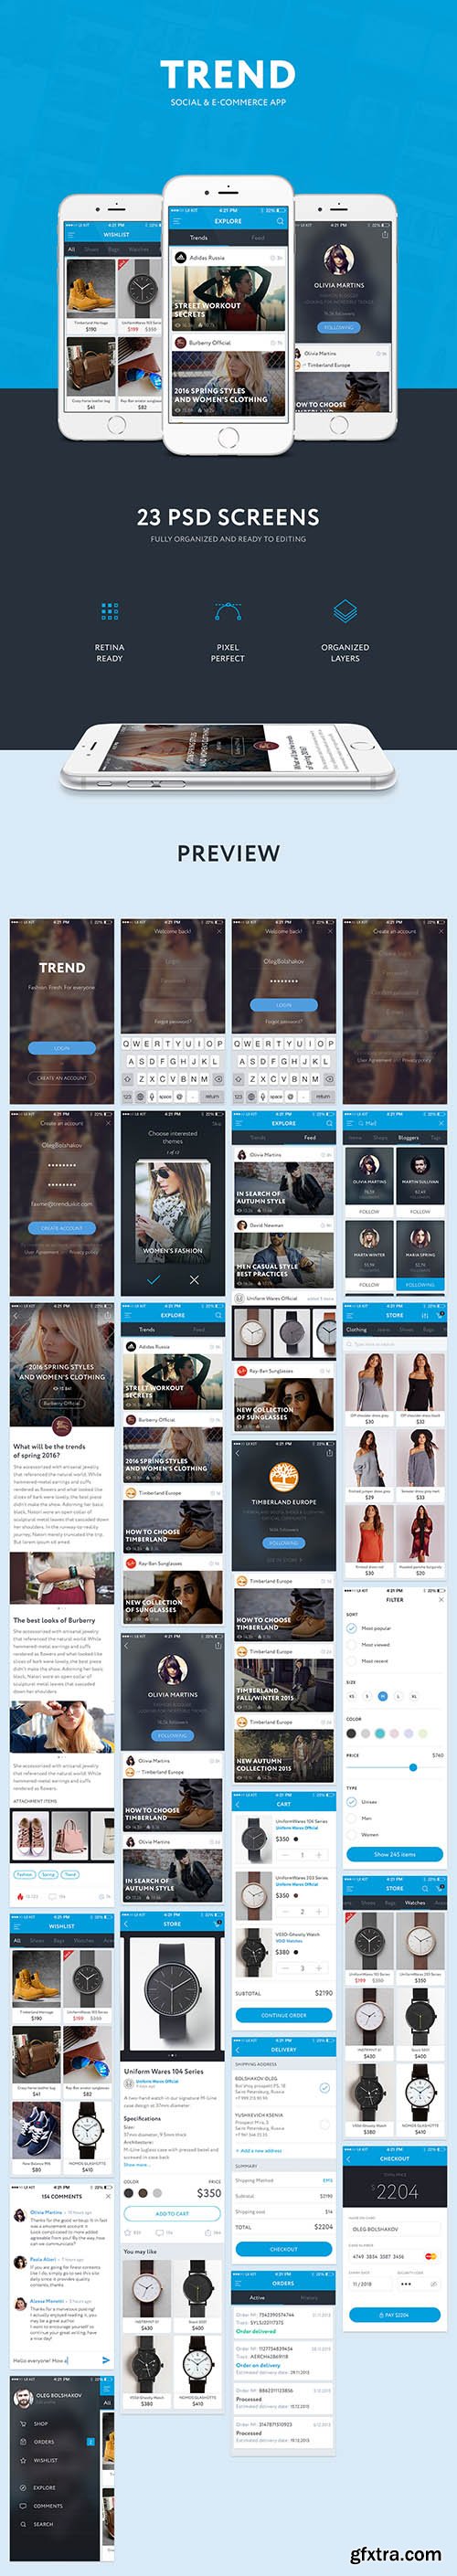 PSD Web Design - TREND - Social And Ecommetce App Ui Kit